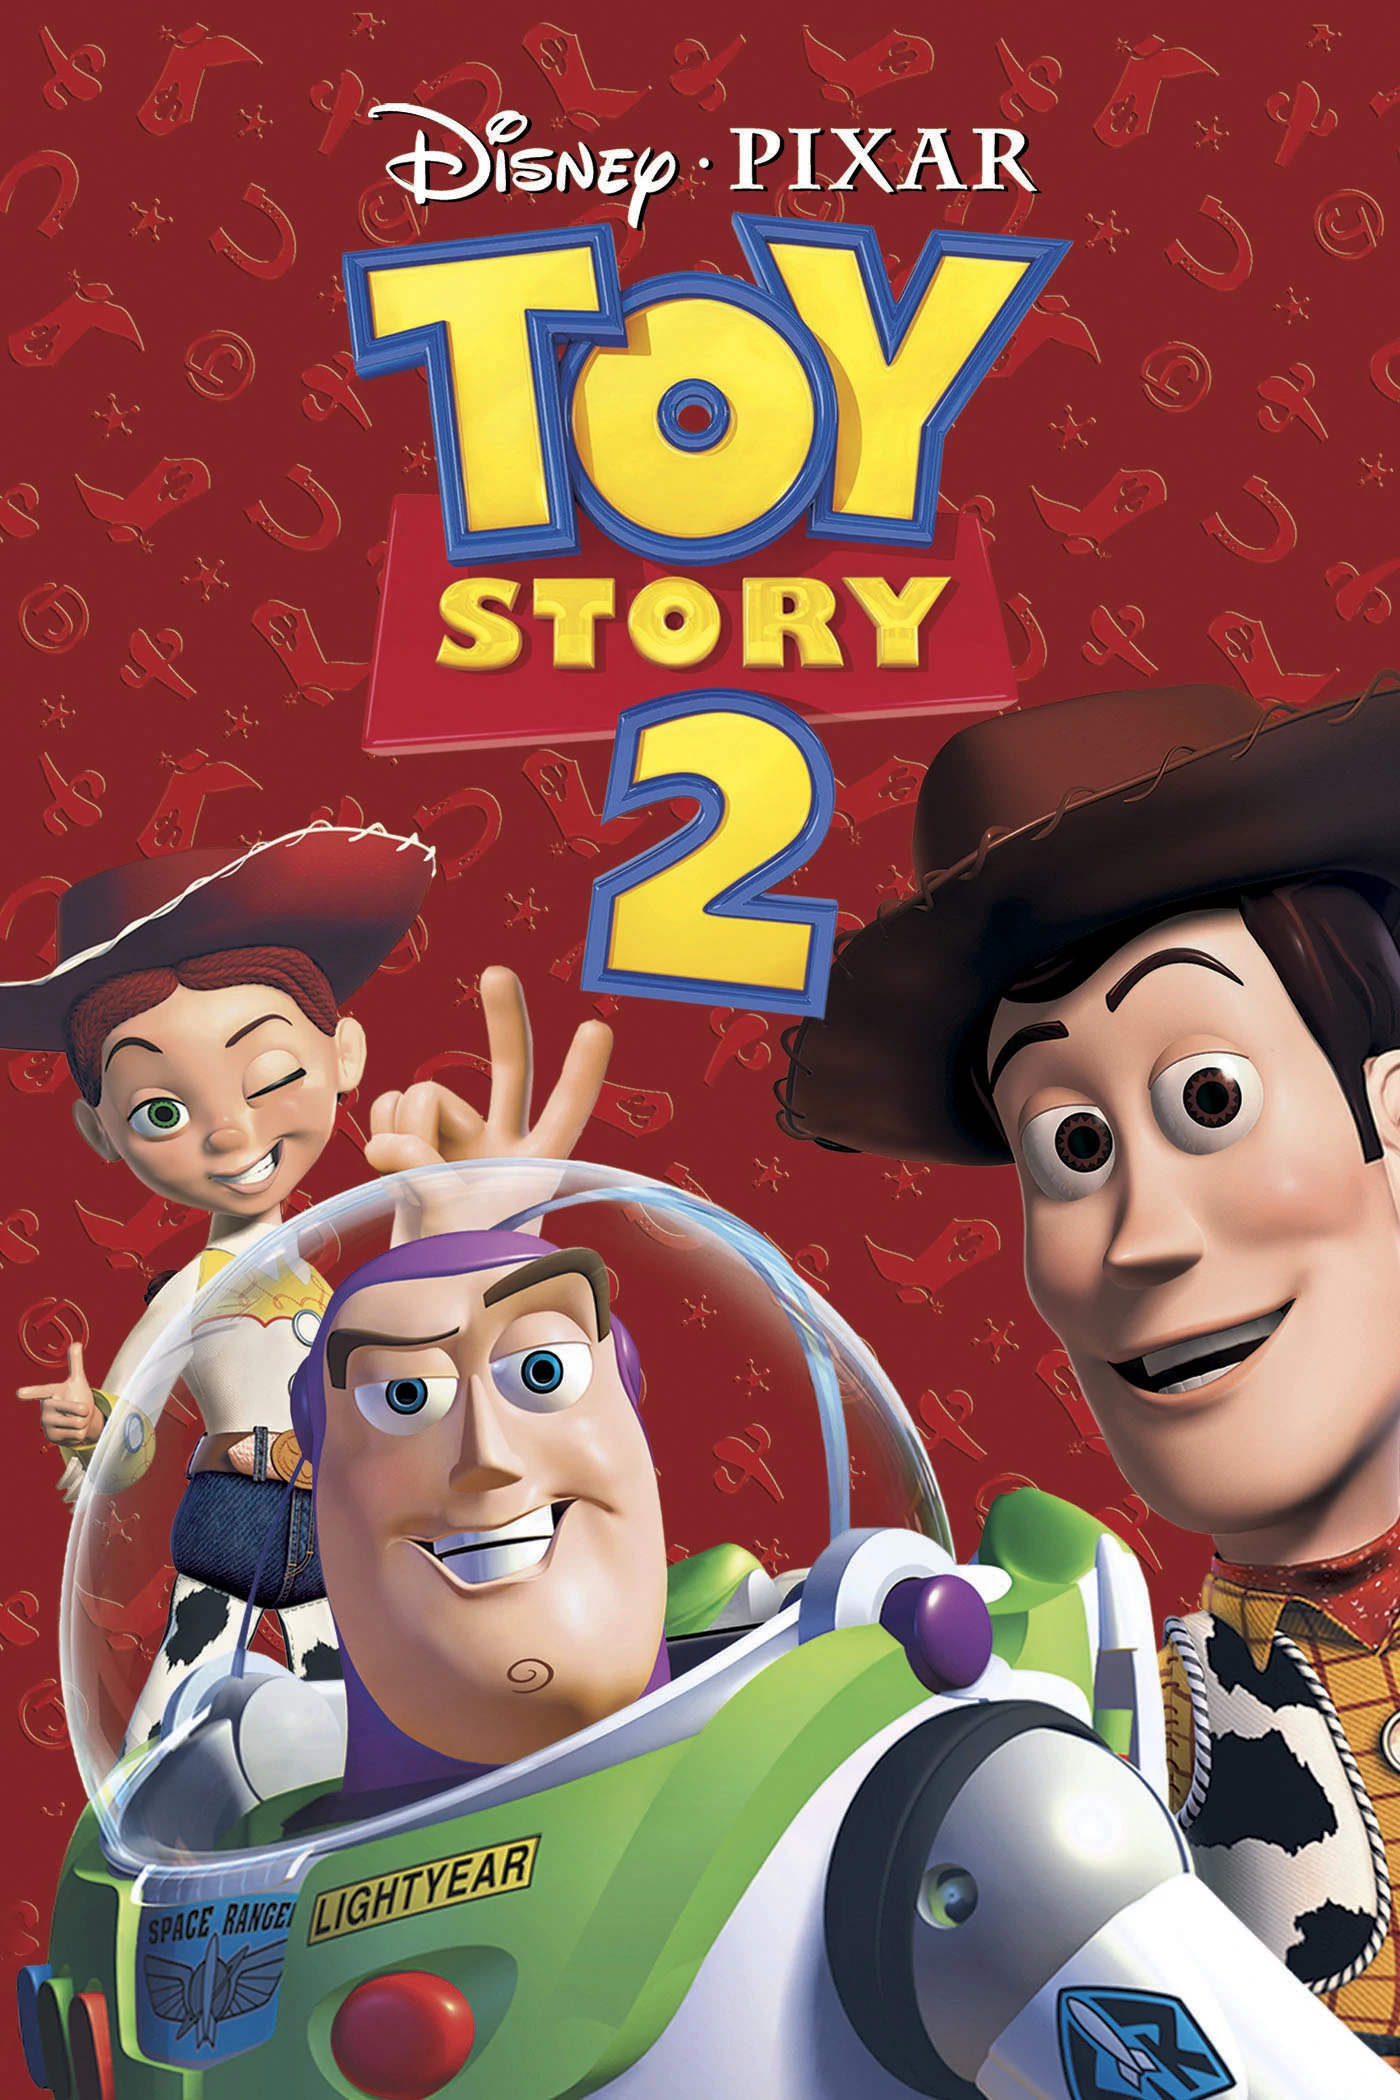 Toy Story 2 (1999) Buzz and the Toys Cross the Road Scene 